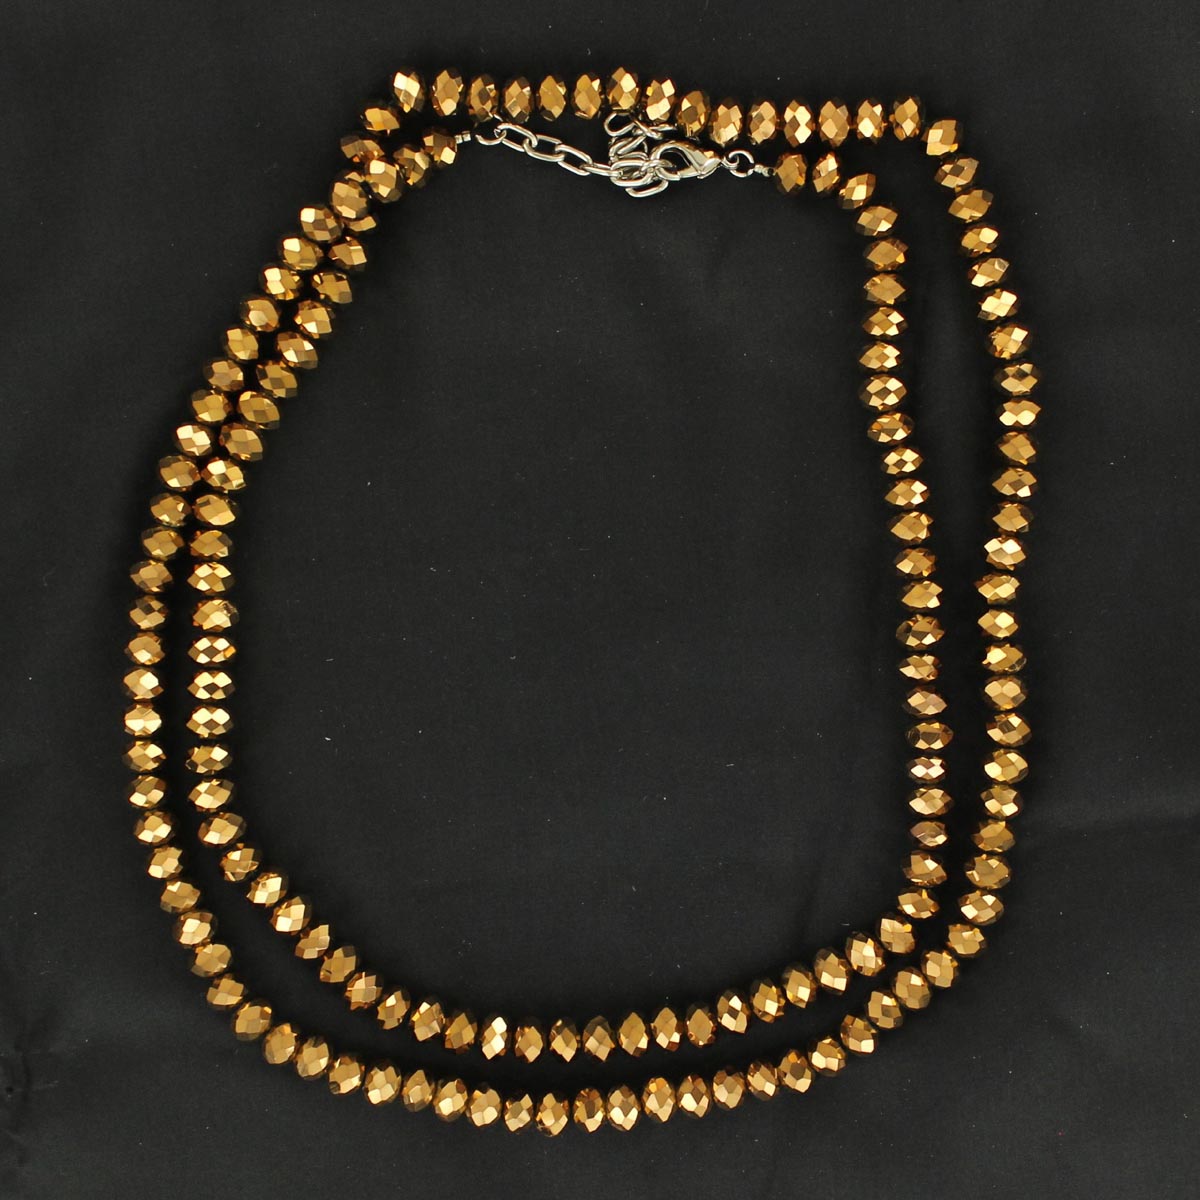 29271 Bright Shine Round Beaded Necklace, Brown - 35 In.